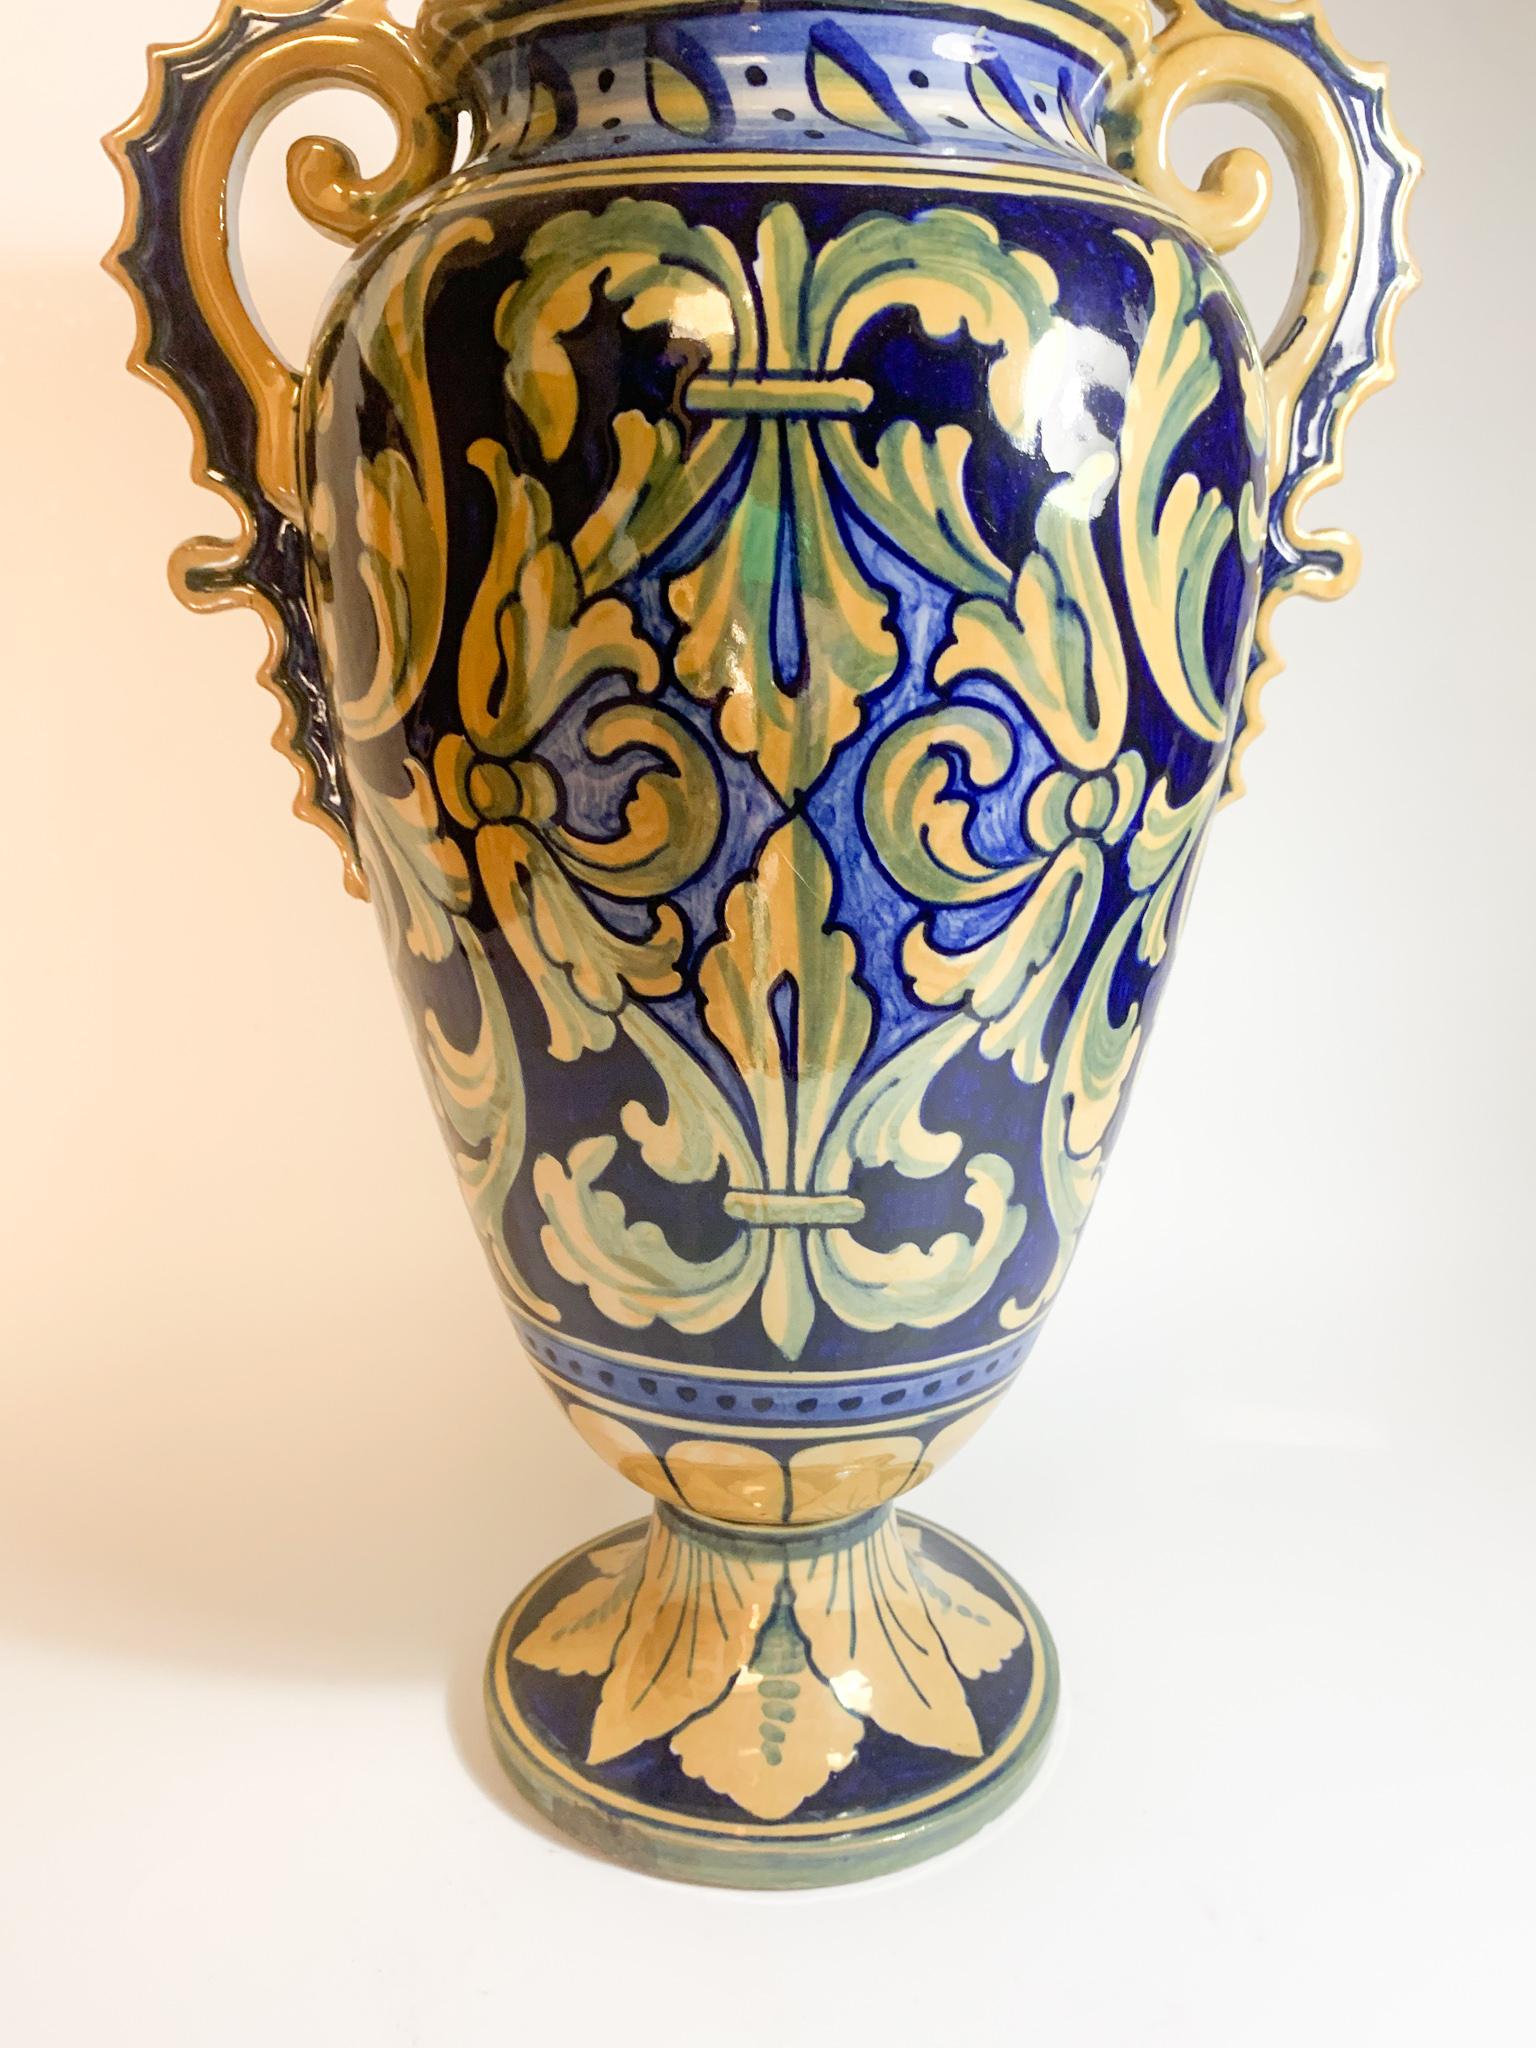 Italian Hand Painted Iridescent Ceramic Vase by Gualdo Tadino from the 1950s In Good Condition For Sale In Milano, MI